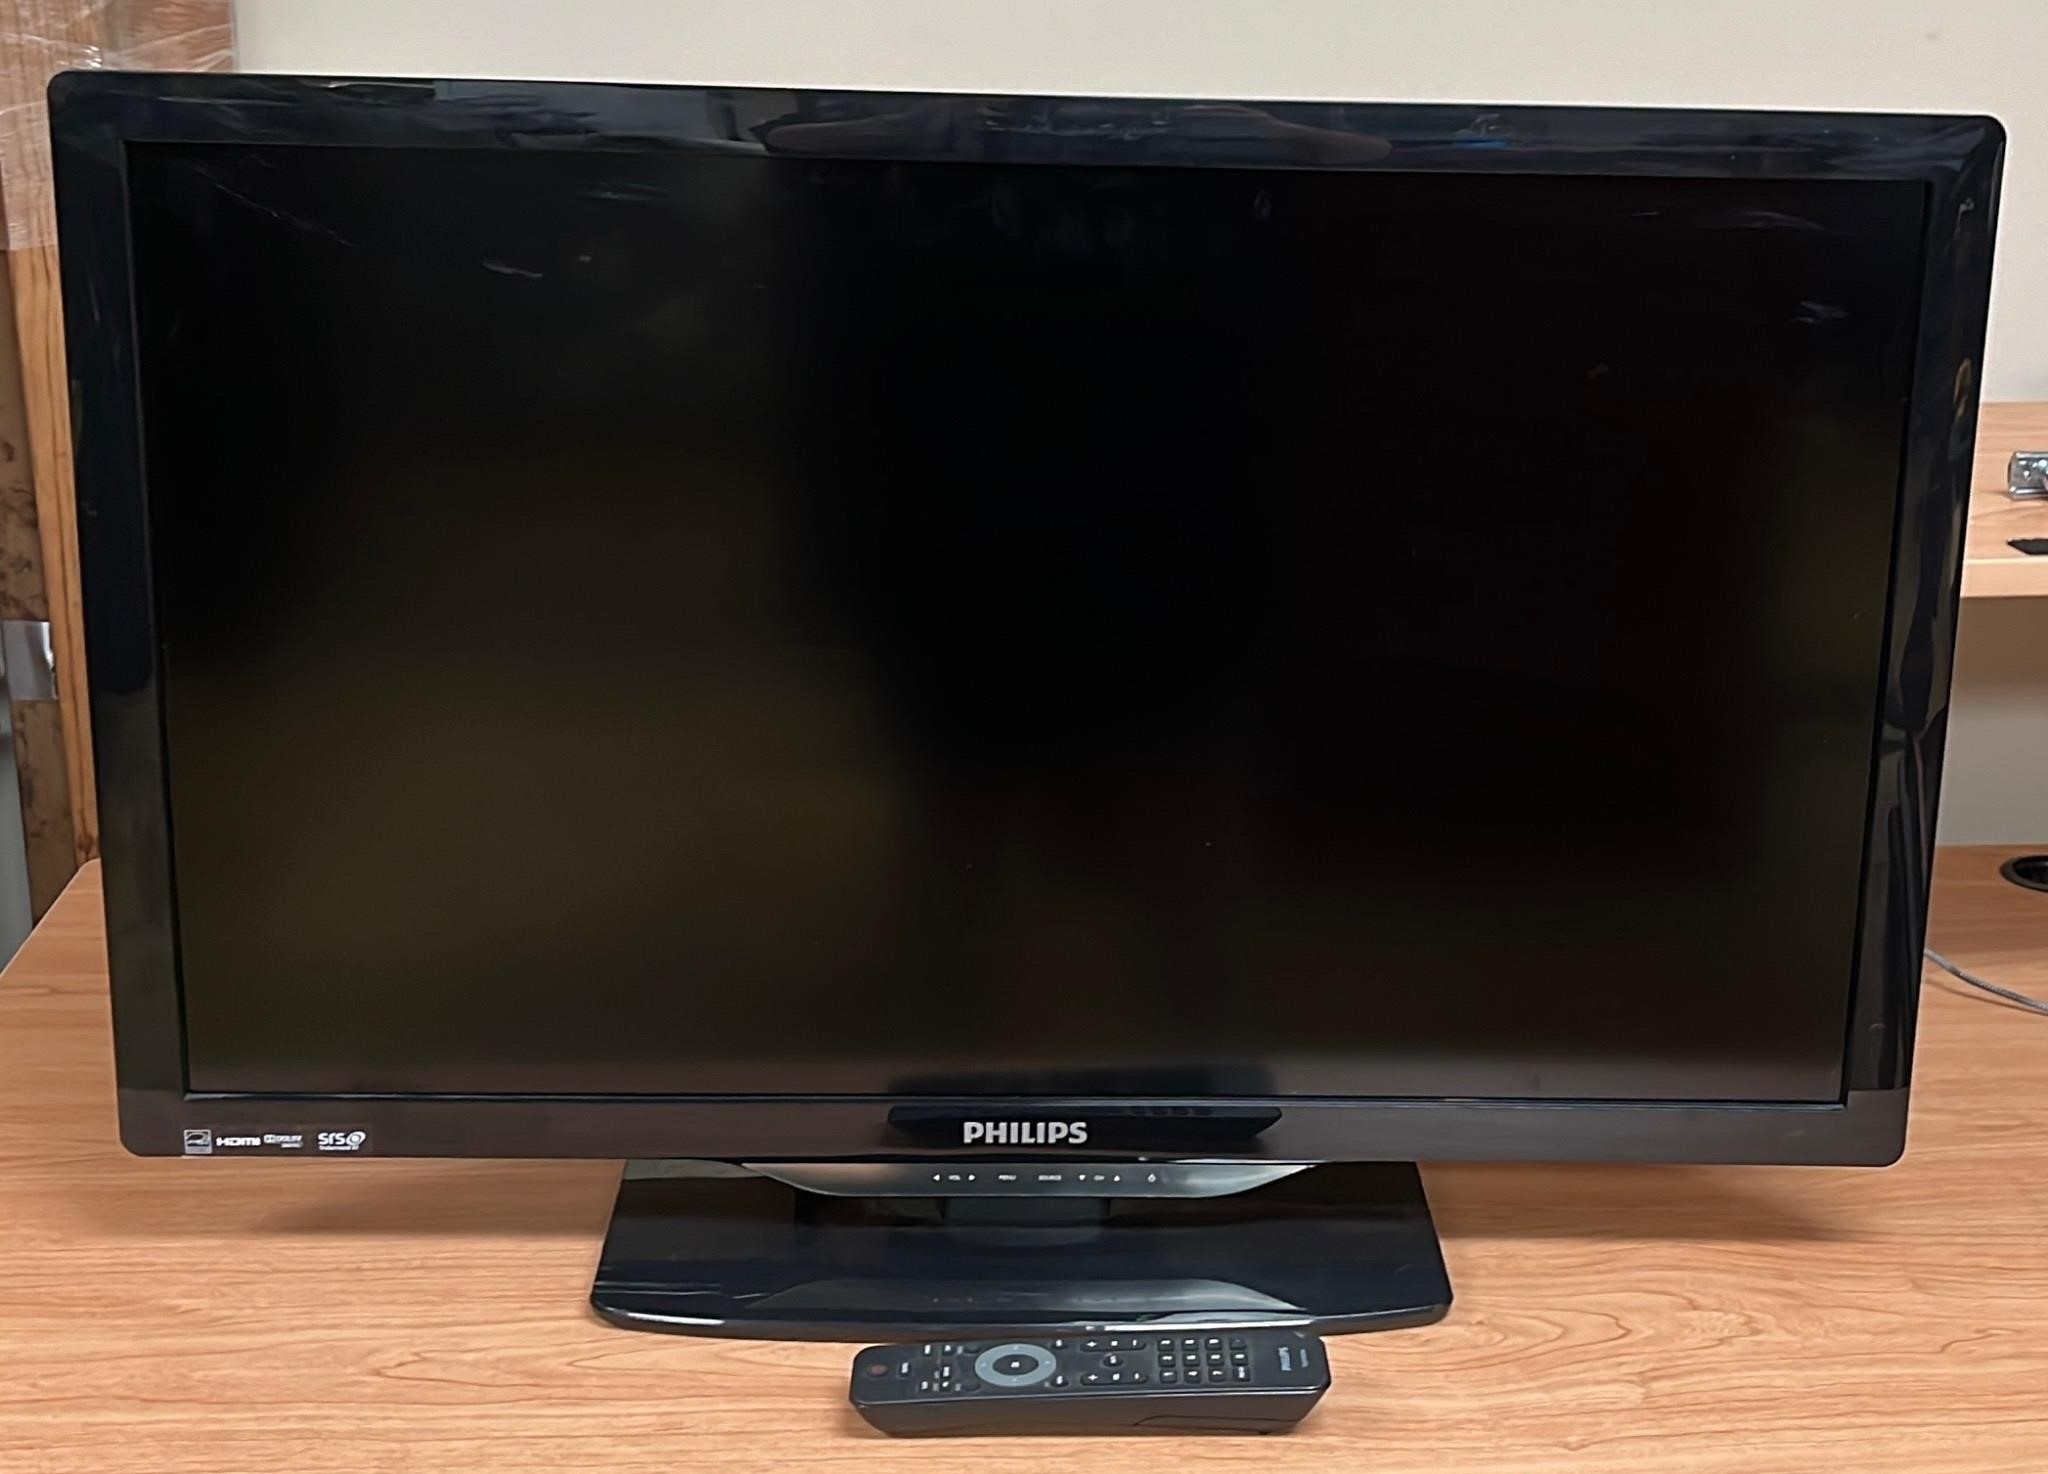 48" Philips SRS TV with Remote